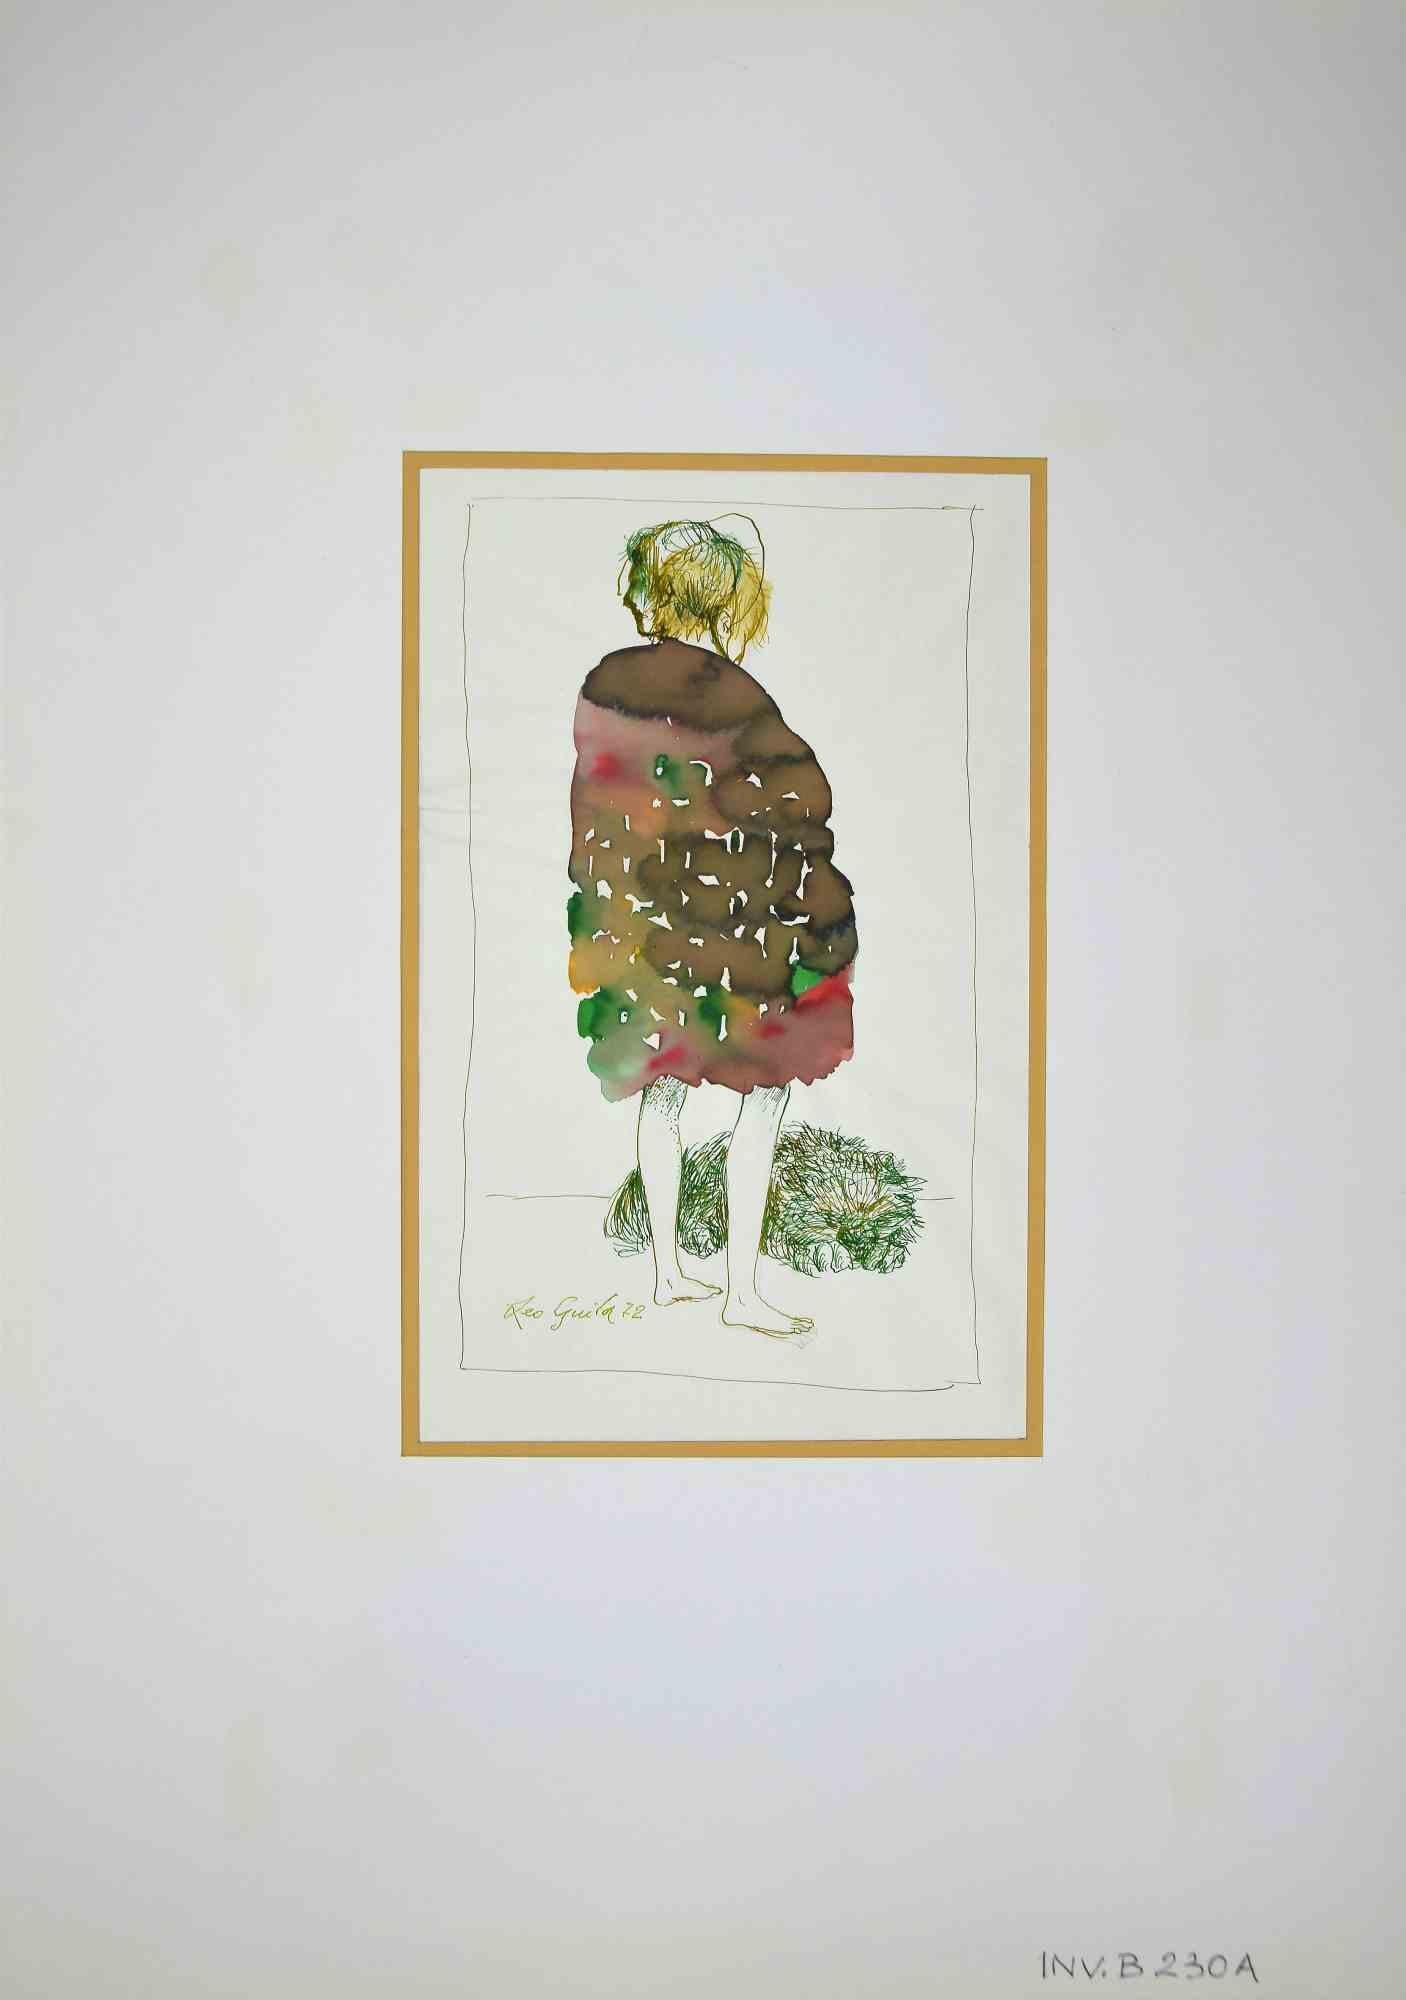 Woman is an original drawing in china ink and watercolor realized by Leo Guida in 1972.

Good condition.

Leo Guida  (1992 - 2017). Sensitive to current issues, artistic movements and historical techniques, Leo Guida has been able to weave with many